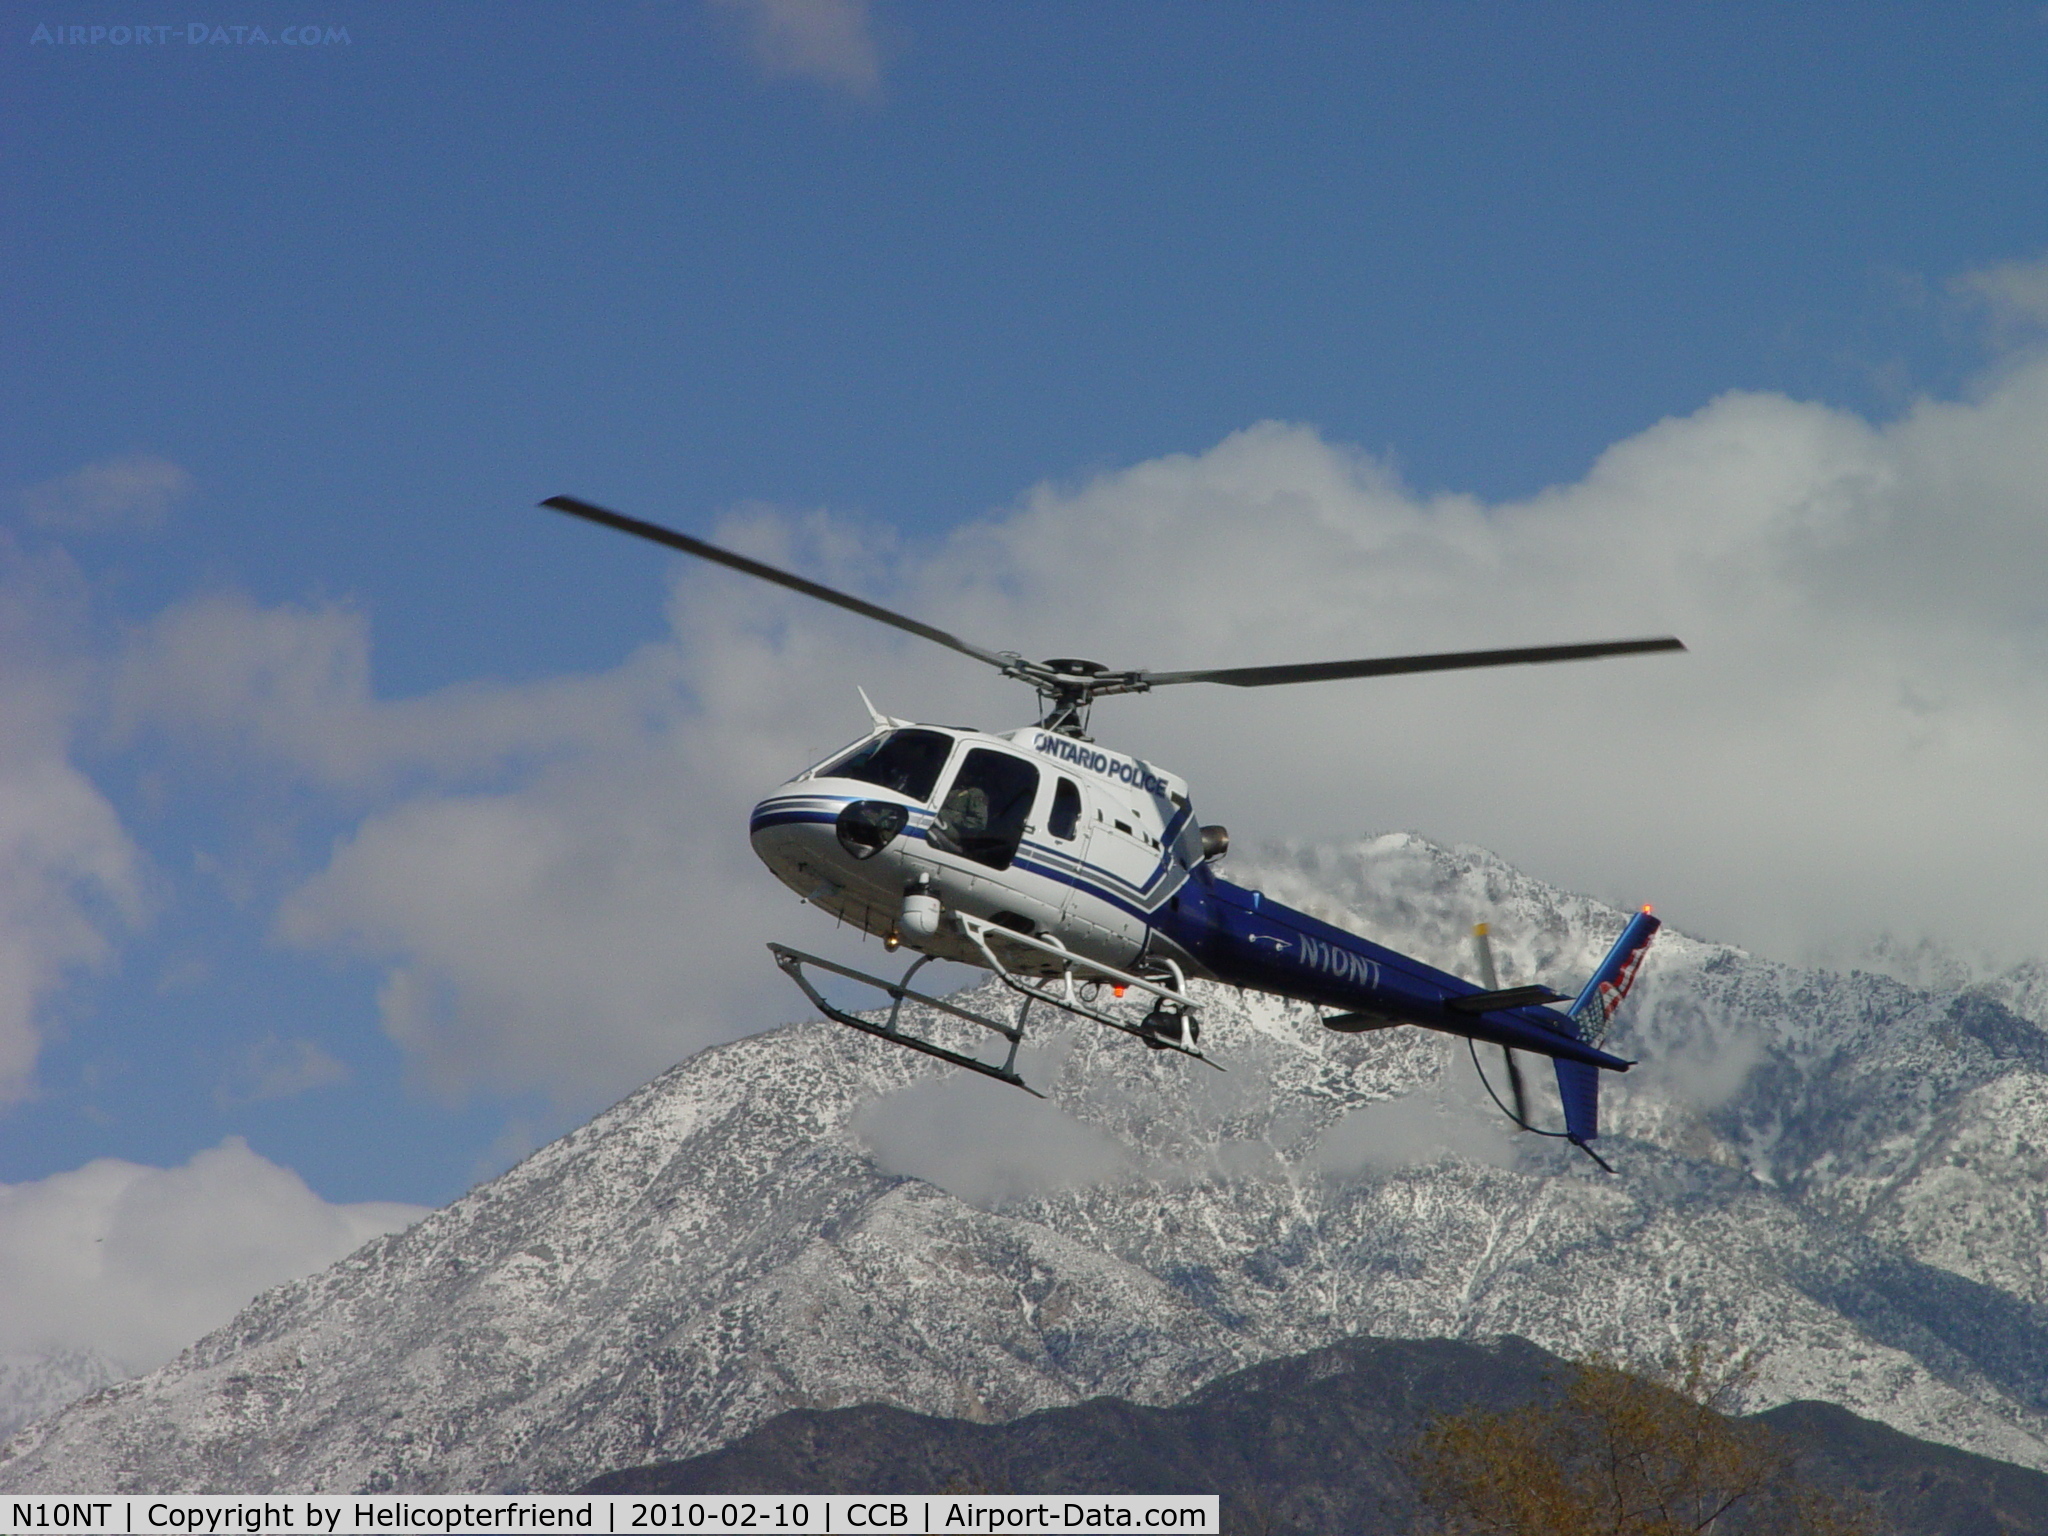 N10NT, 2002 Eurocopter AS-350B-2 Ecureuil Ecureuil C/N 3590, Flaring south of the snow capped peaks for OPD Helipad